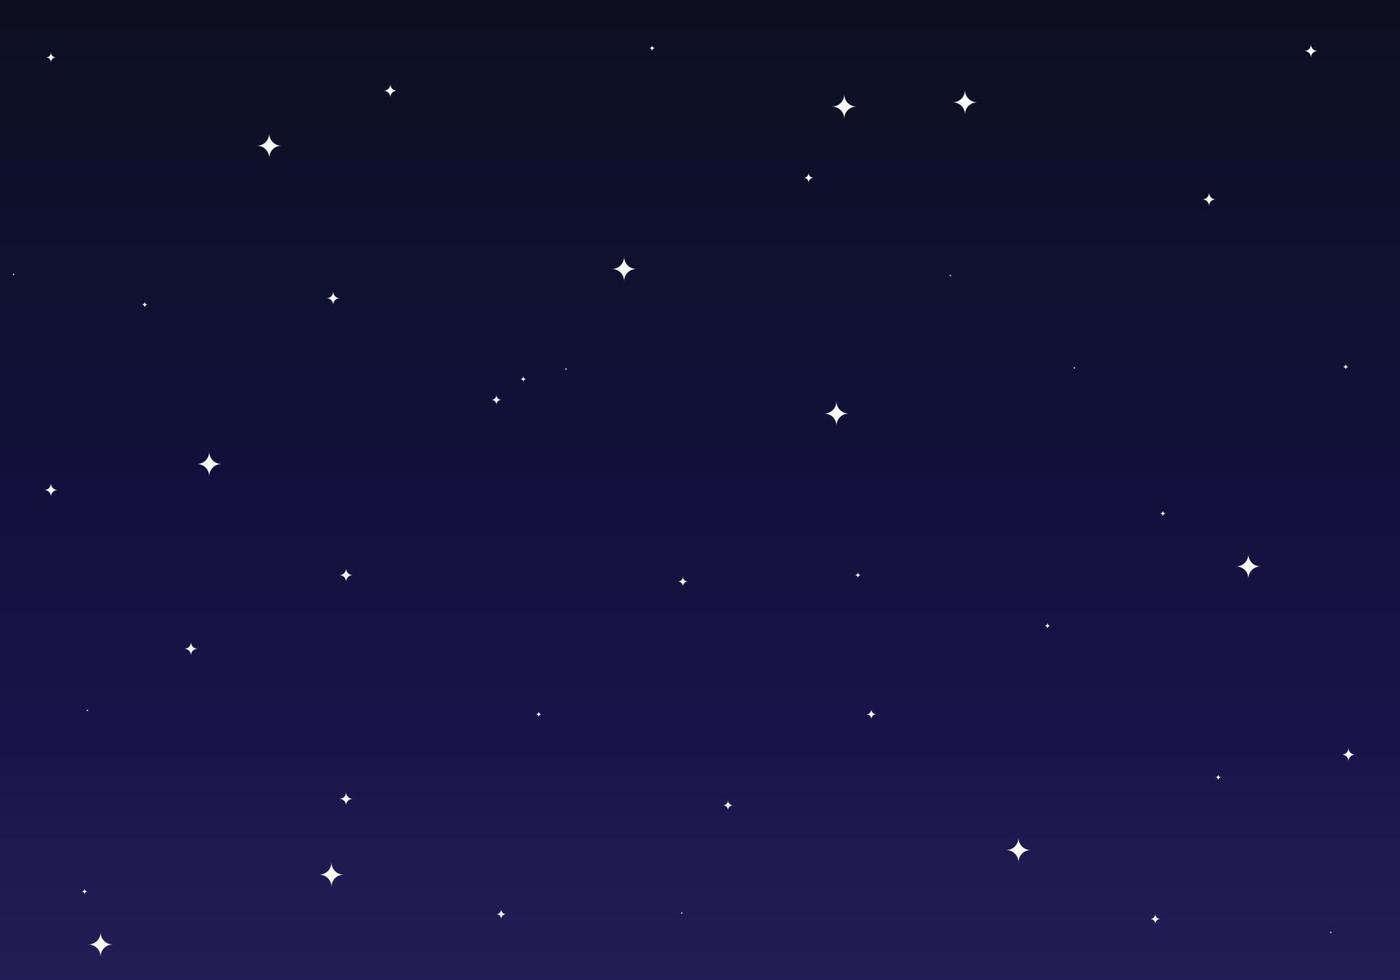 eps10 vector illustration of a dark Night shining starry sky, dark blue space background with stars